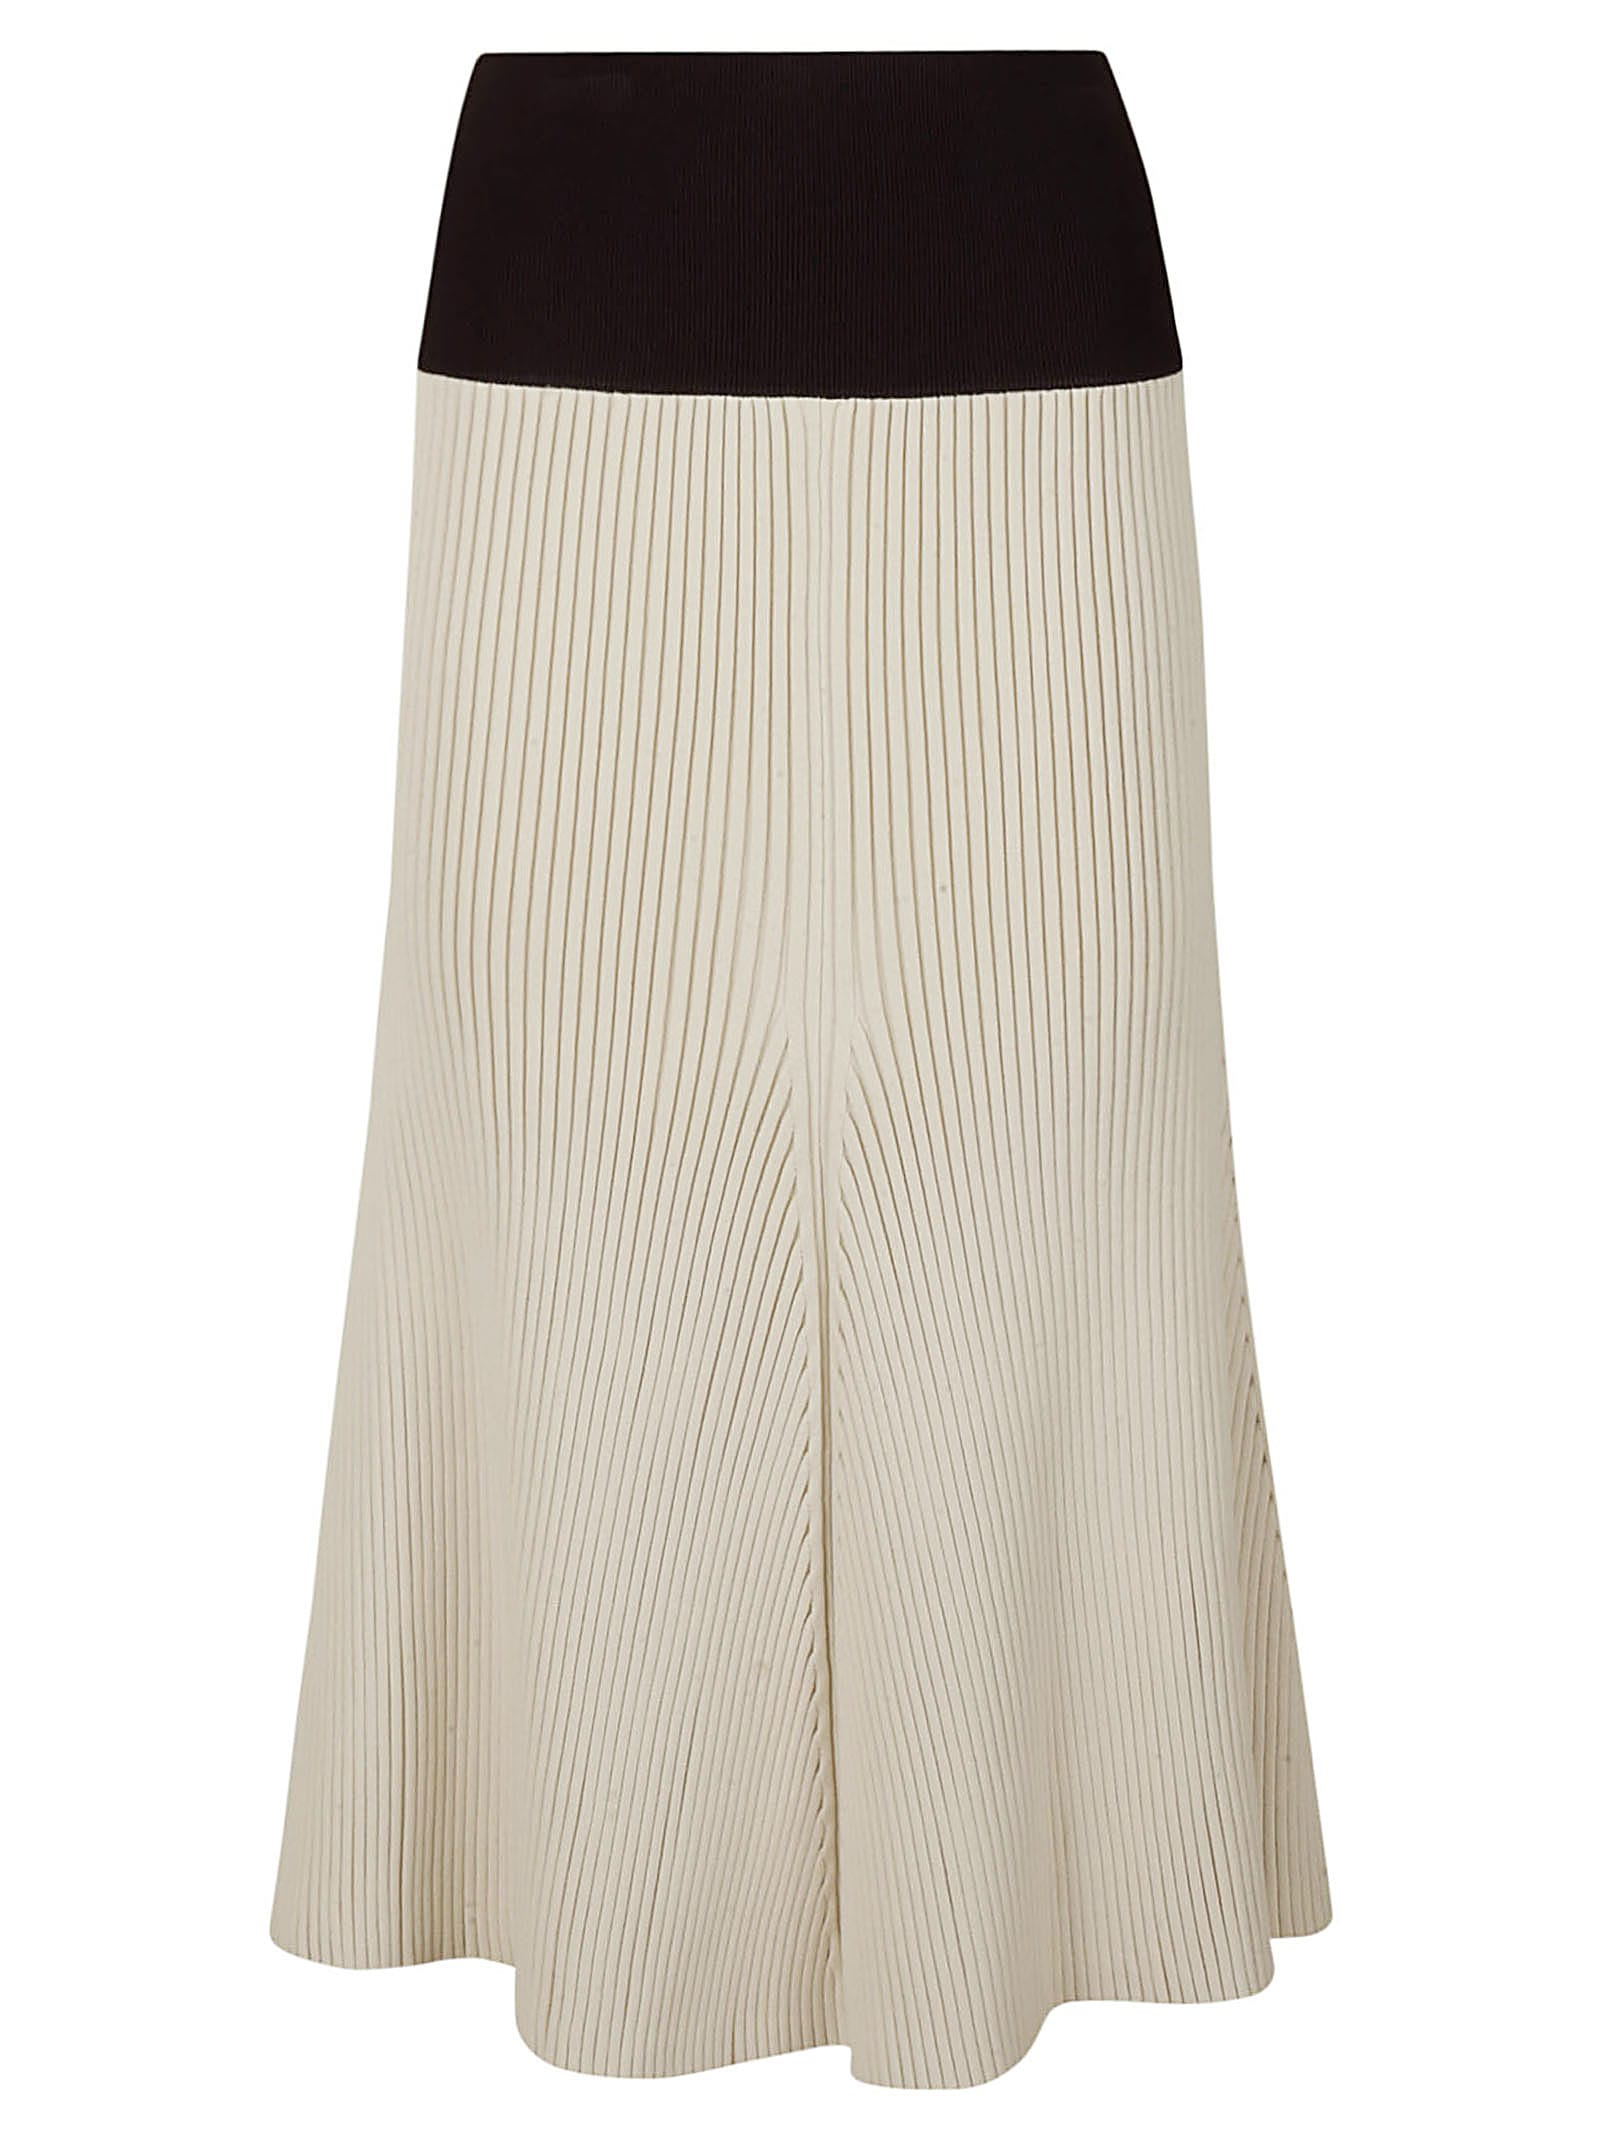 TORY BURCH RIBBED SWEATER SKIRT